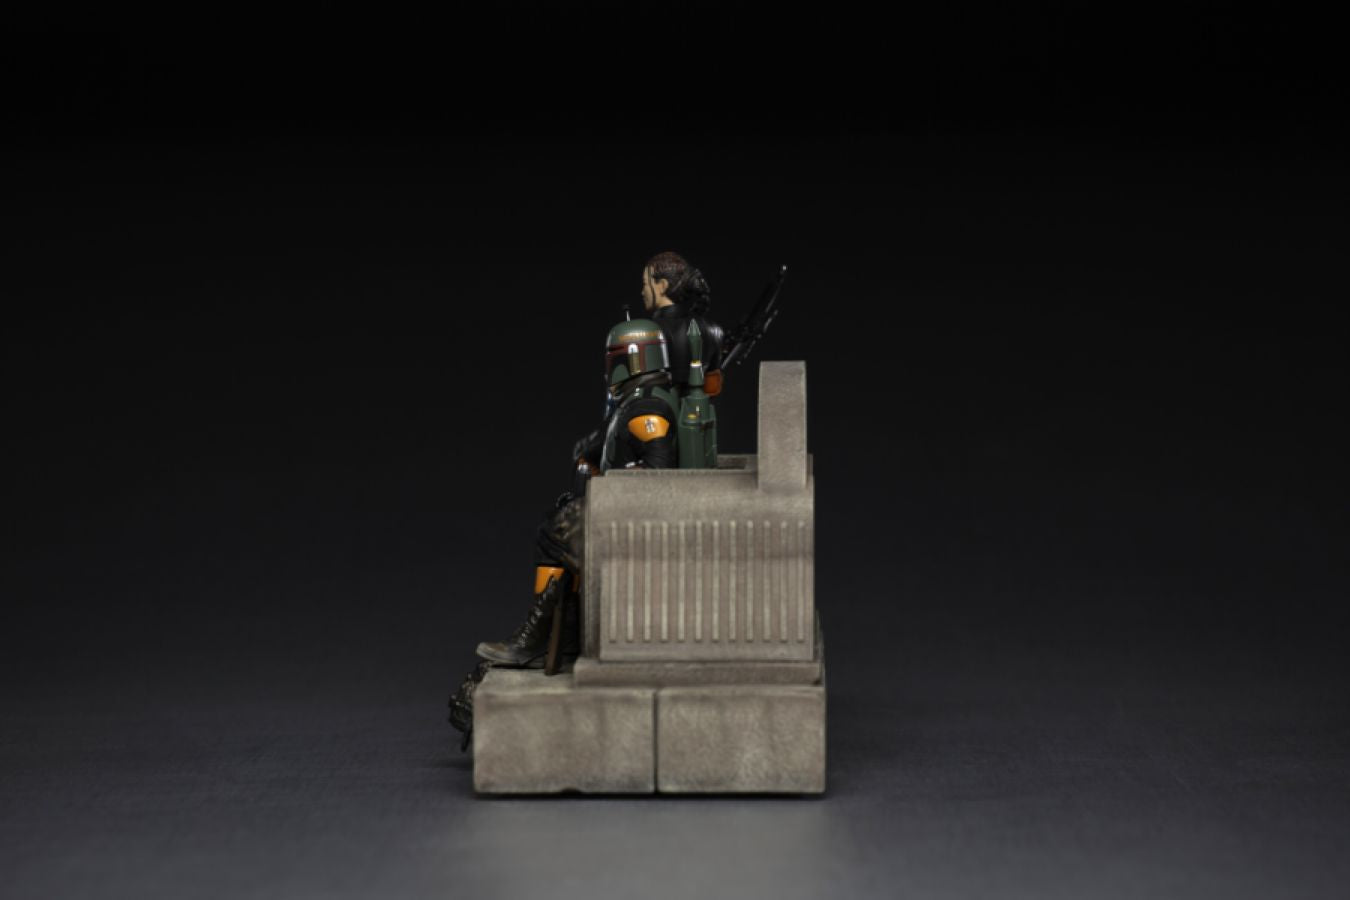 Star Wars: The Mandalorian - Boba Fett & Fennec Shand on Throne Deluxe 1:10 Scale Statue